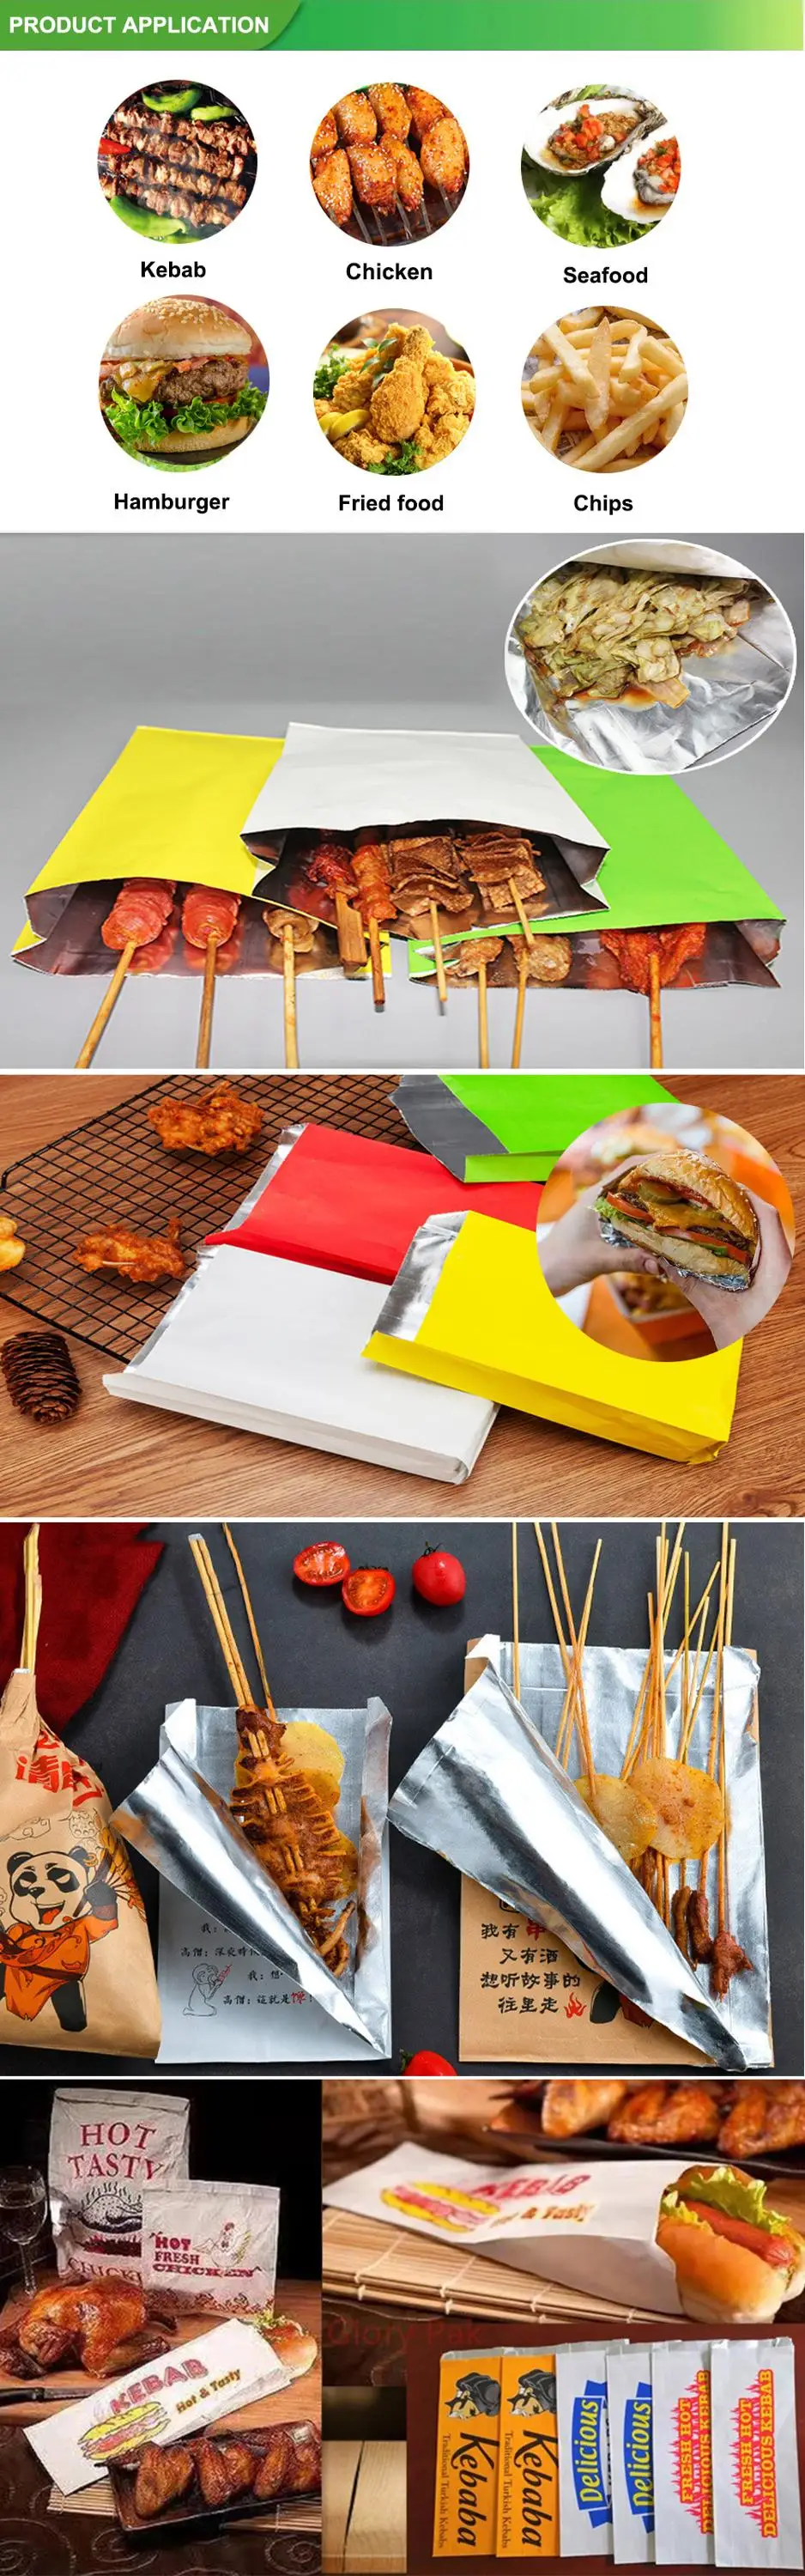 Bbq Printed Whited Paper Foil Lined Kebab Bag Oilproof Burger Bags